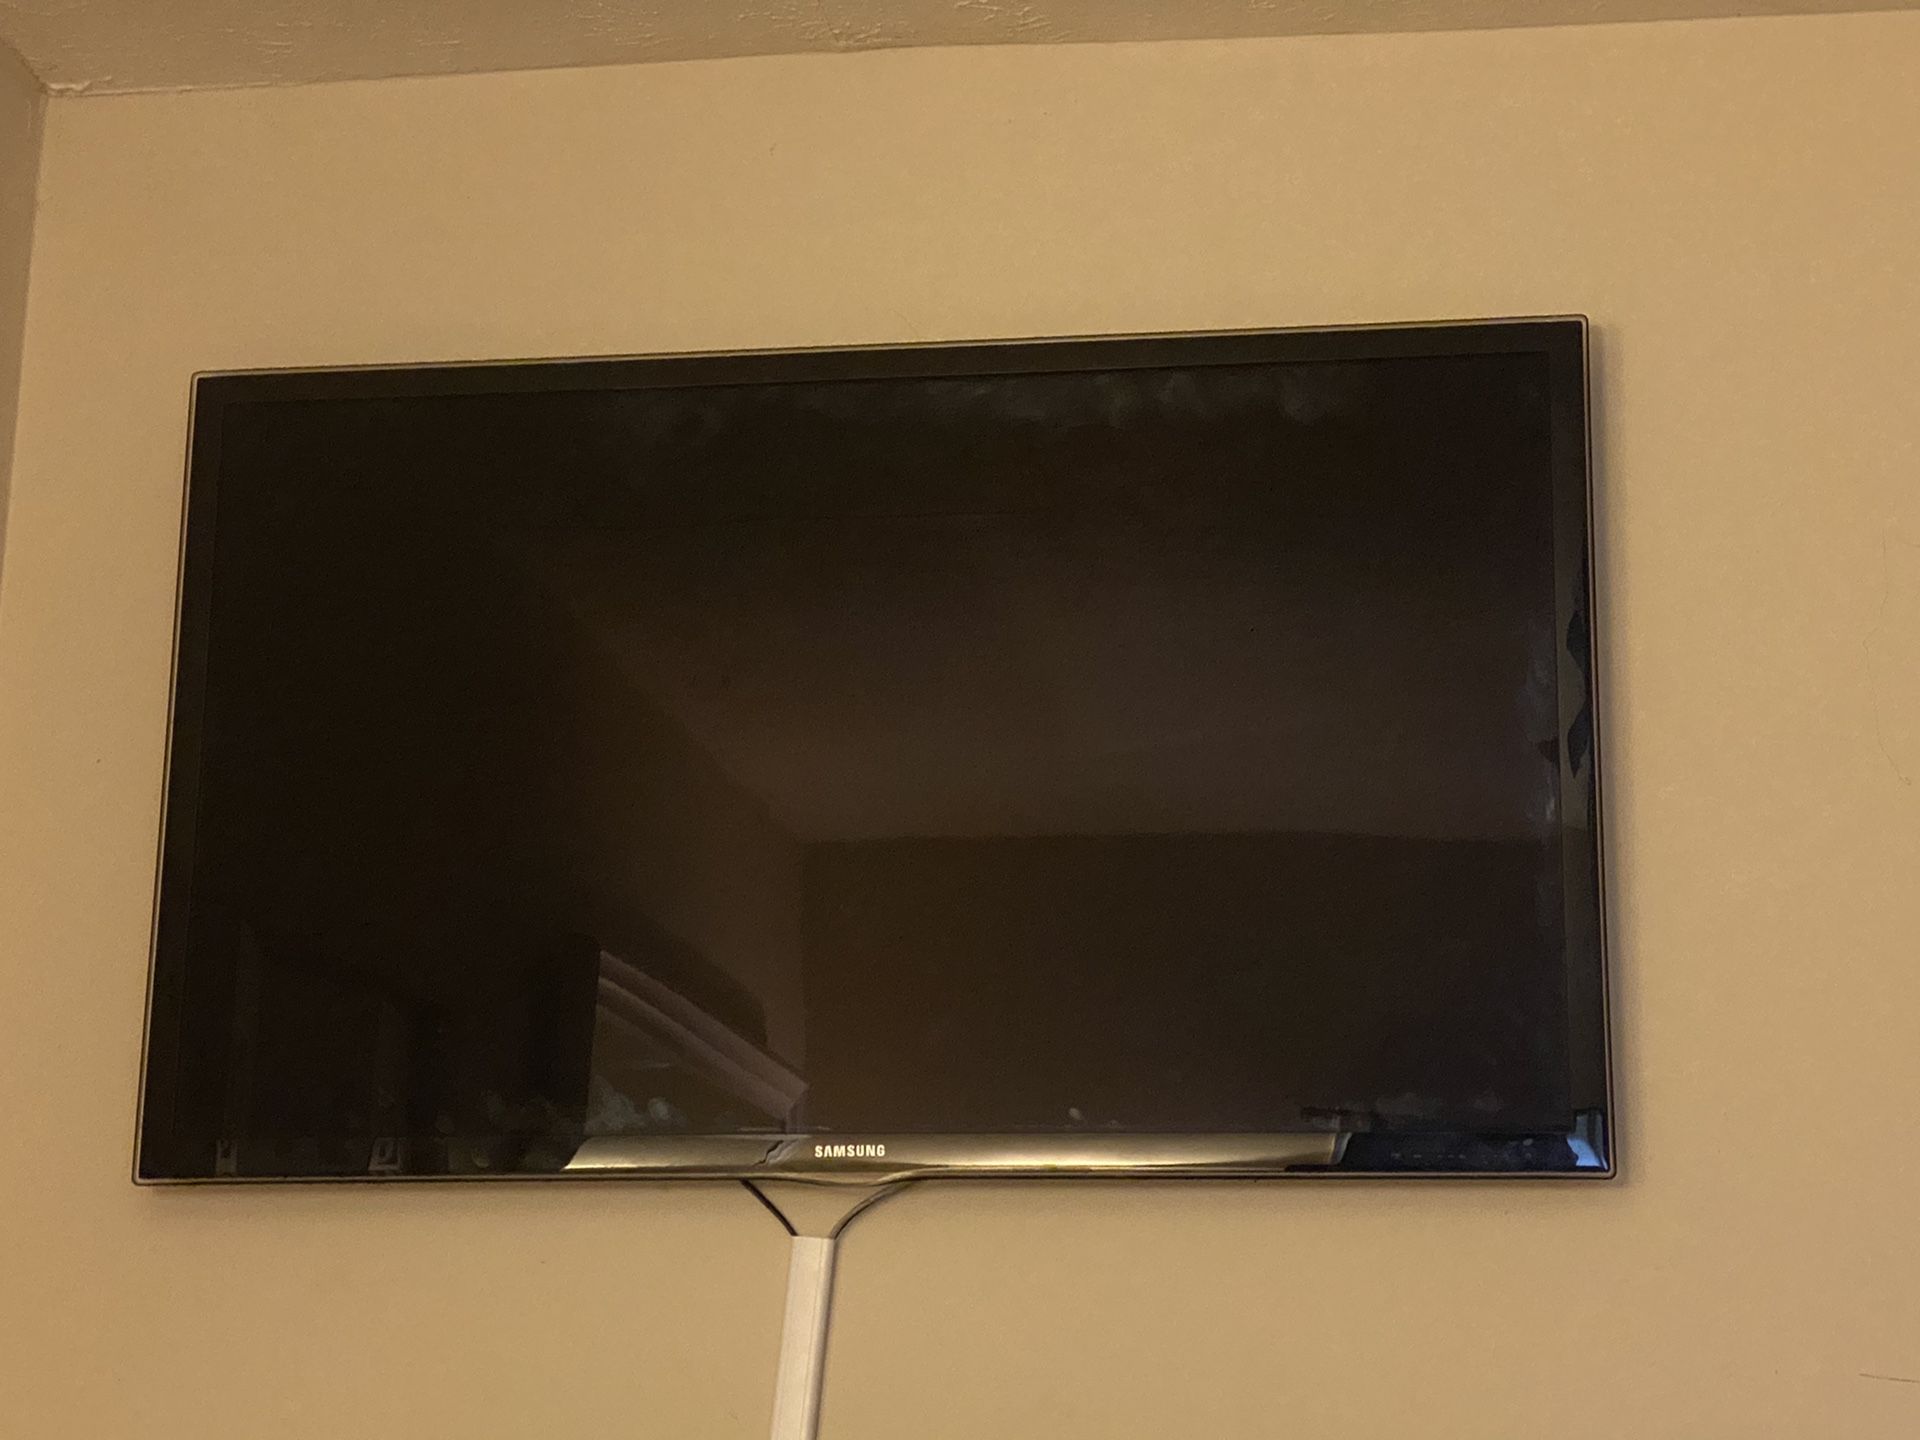 55 inch Samsung TV do not have a TV stand And is not a smart TV